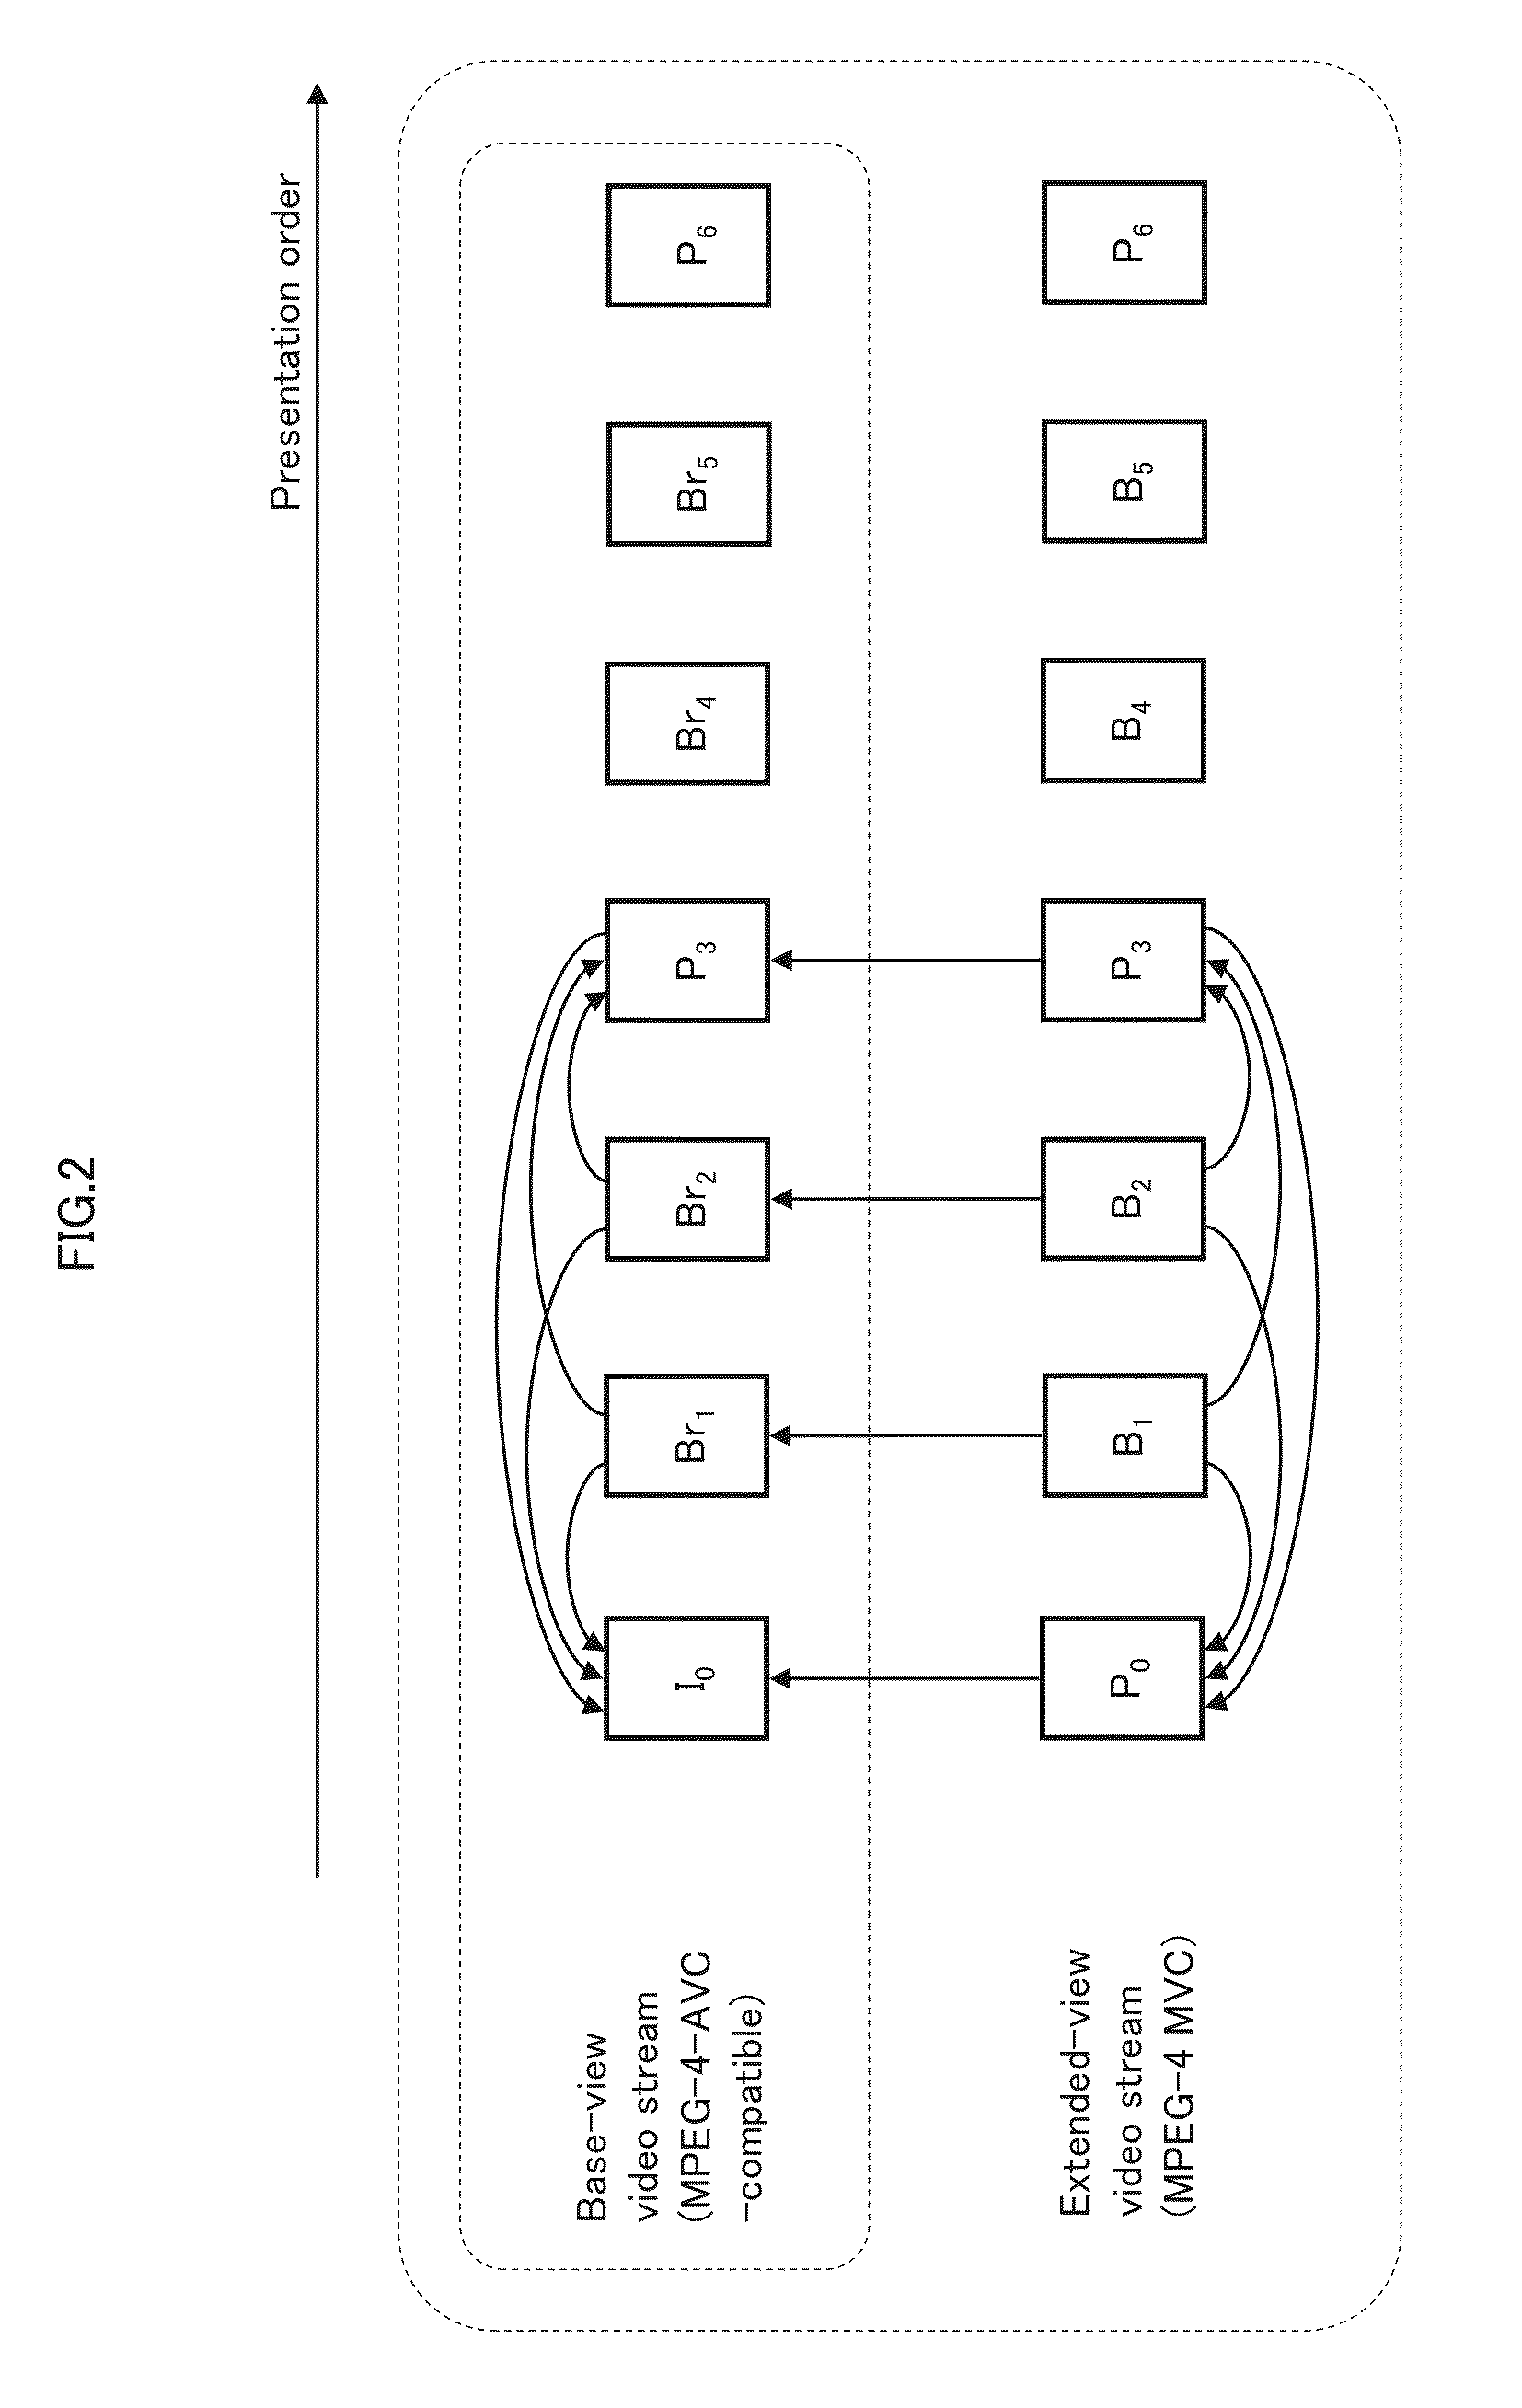 Video coding device for coding videos of a plurality of qualities to generate streams and video playback device for playing back streams